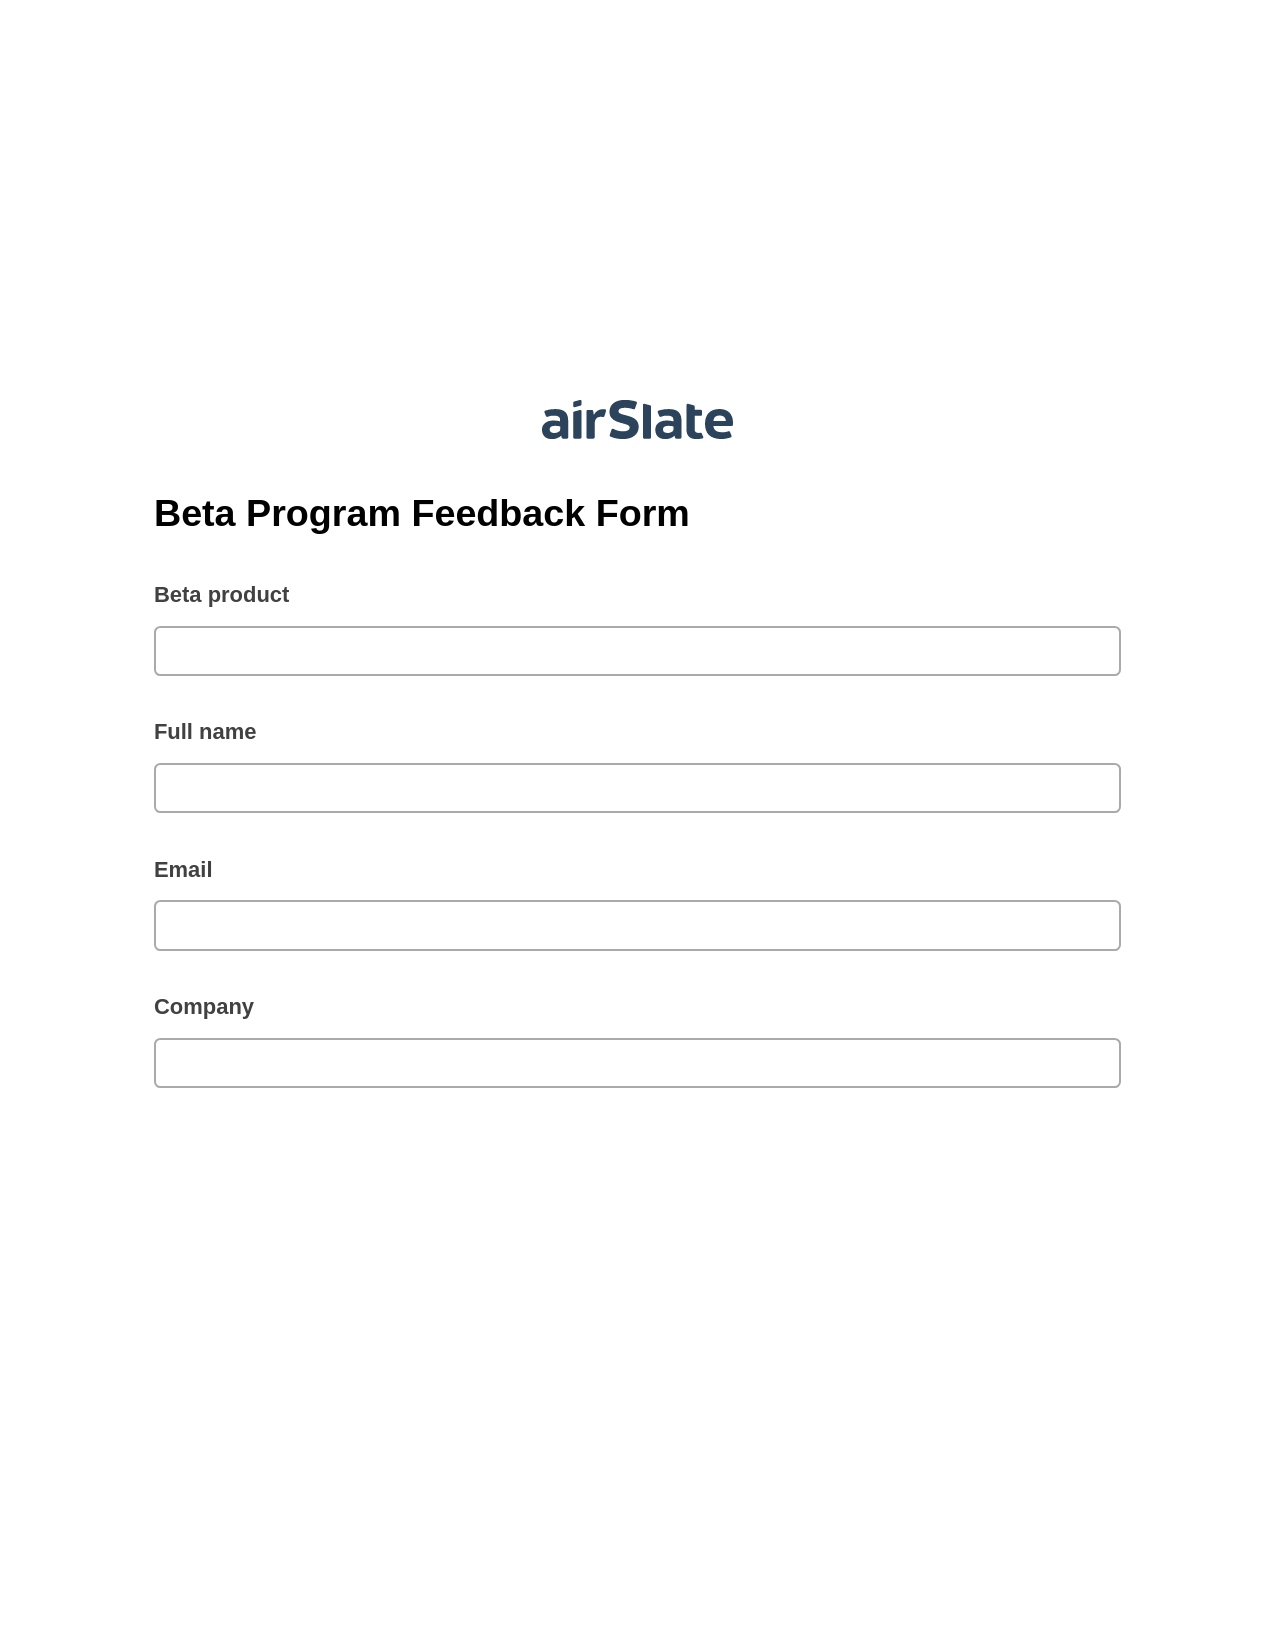 Beta Program Feedback Form Pre-fill from Google Sheets Bot, Send a Slate with Roles Bot, Export to Google Sheet Bot